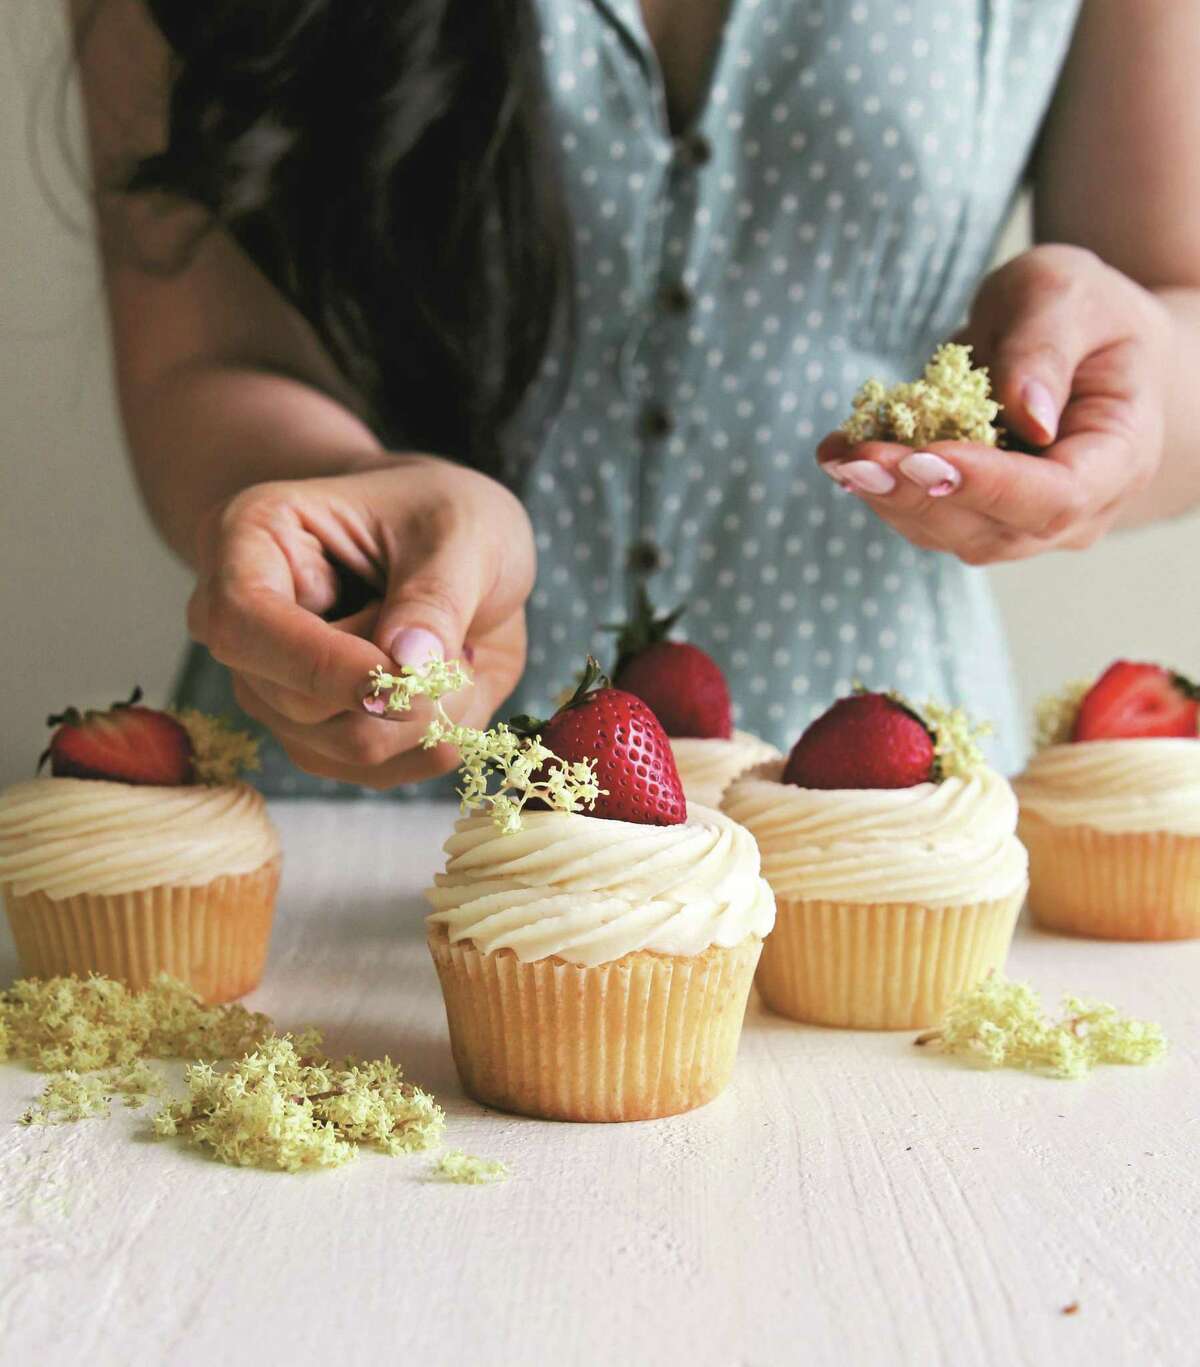 Lemon-Ricotta Cupcakes with Lemon-Elderflower Buttercream (recipe in column): Lemon and ricotta is a beautiful spring combination, and even more so when it is paired with elderflowers.